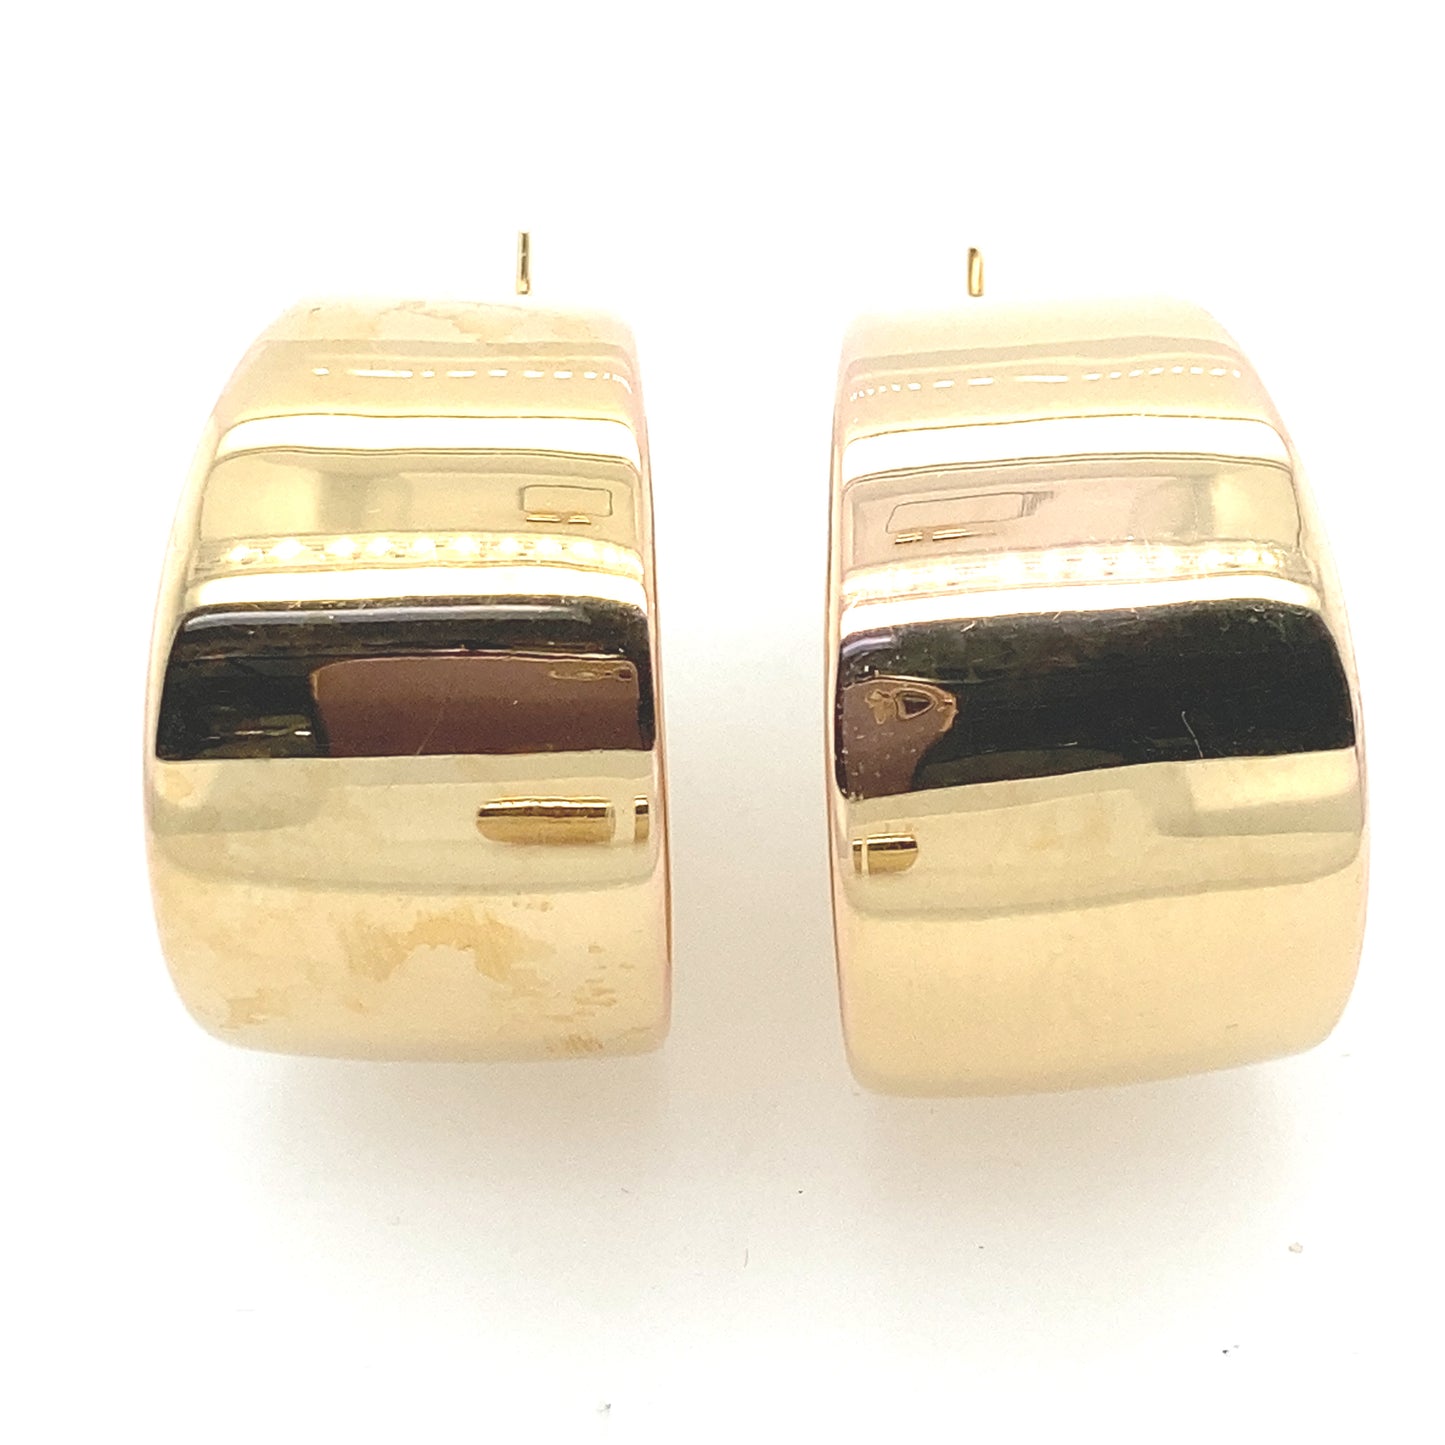 14 k yellow gold hoop earring from Italy.